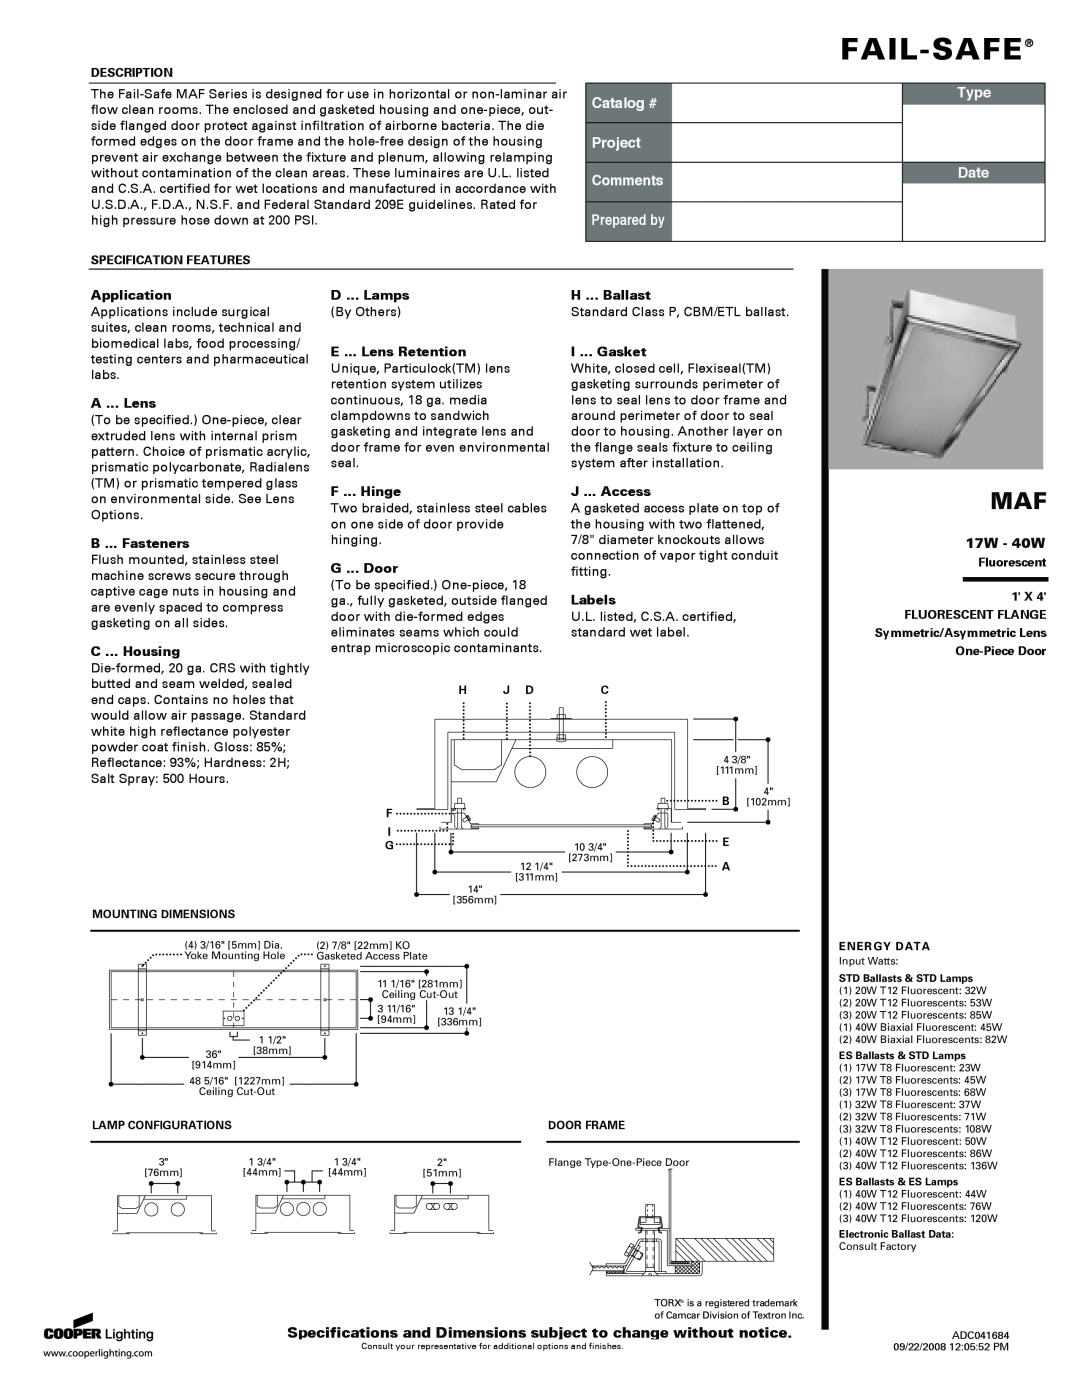 Cooper Lighting BETA 50 specifications 17W - 40W, Fail-Safe, Catalog #, Project Comments, Prepared by, Type, Date 